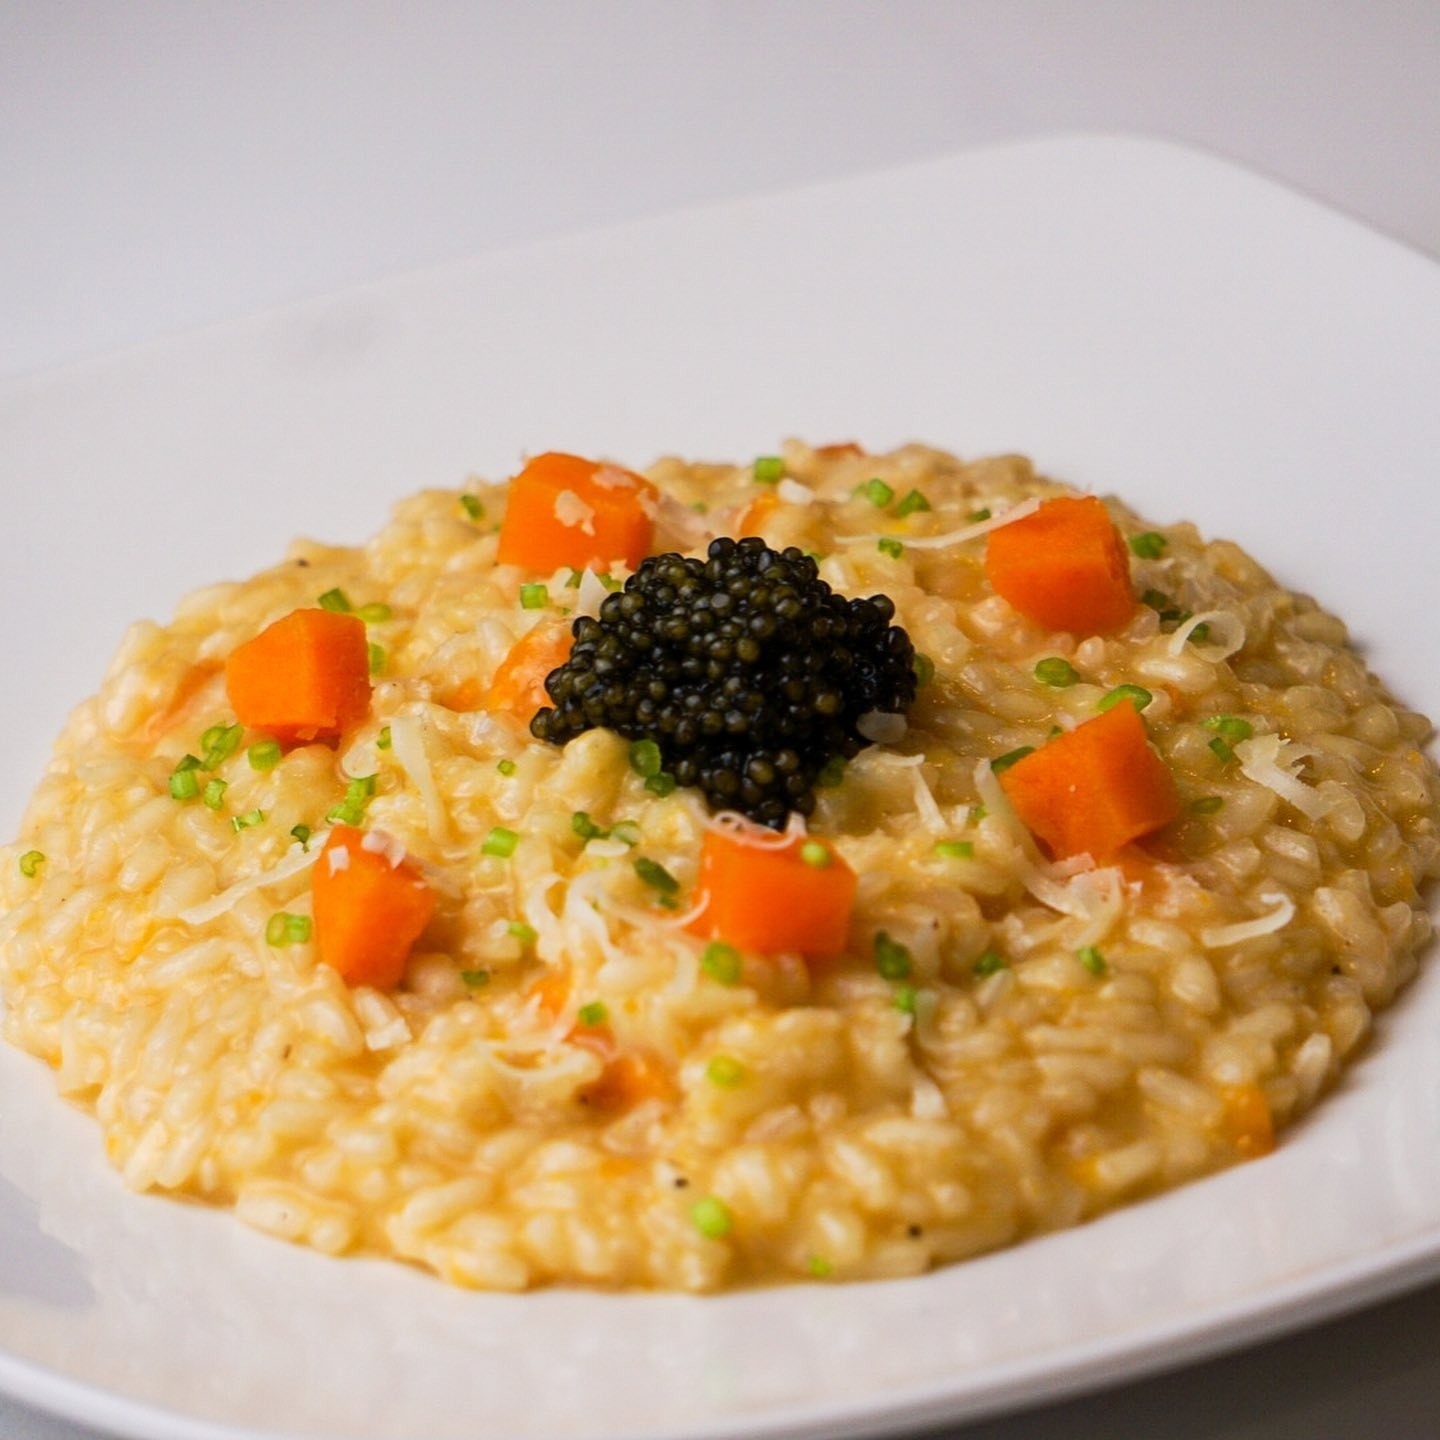 Risotto paired with Royal Caviar